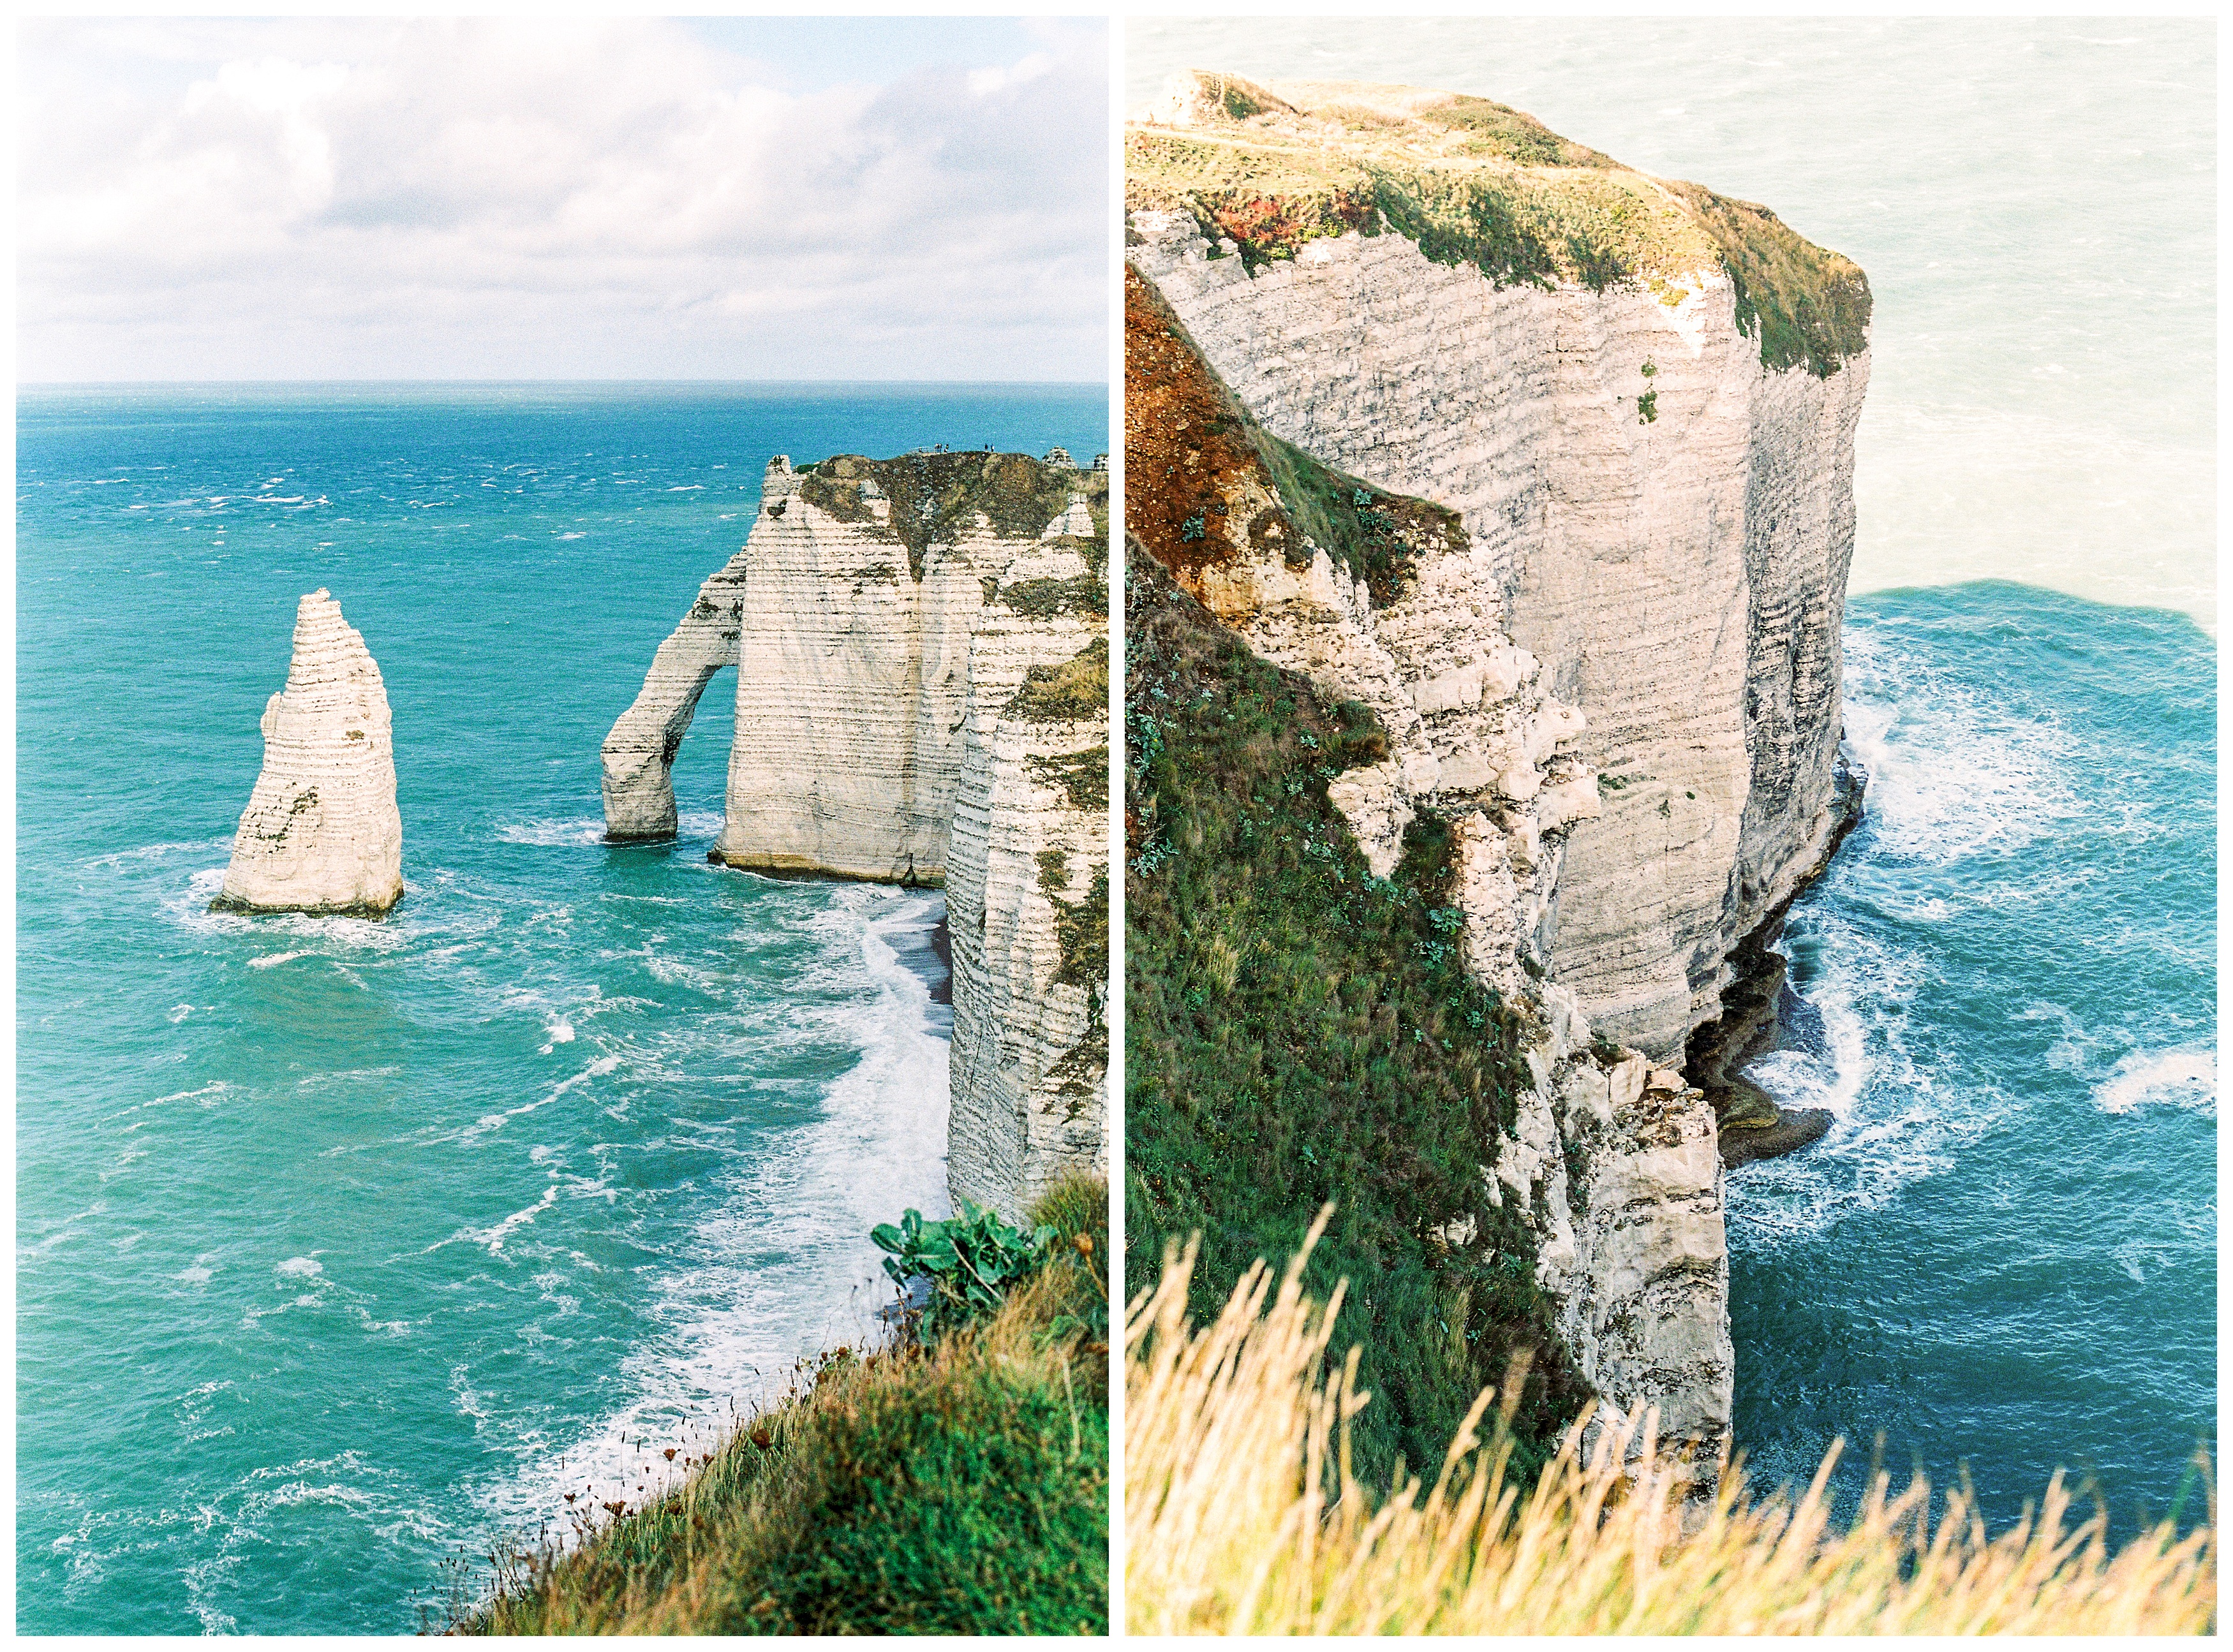 the famous "elephant white cliff in etretat, normandy, france